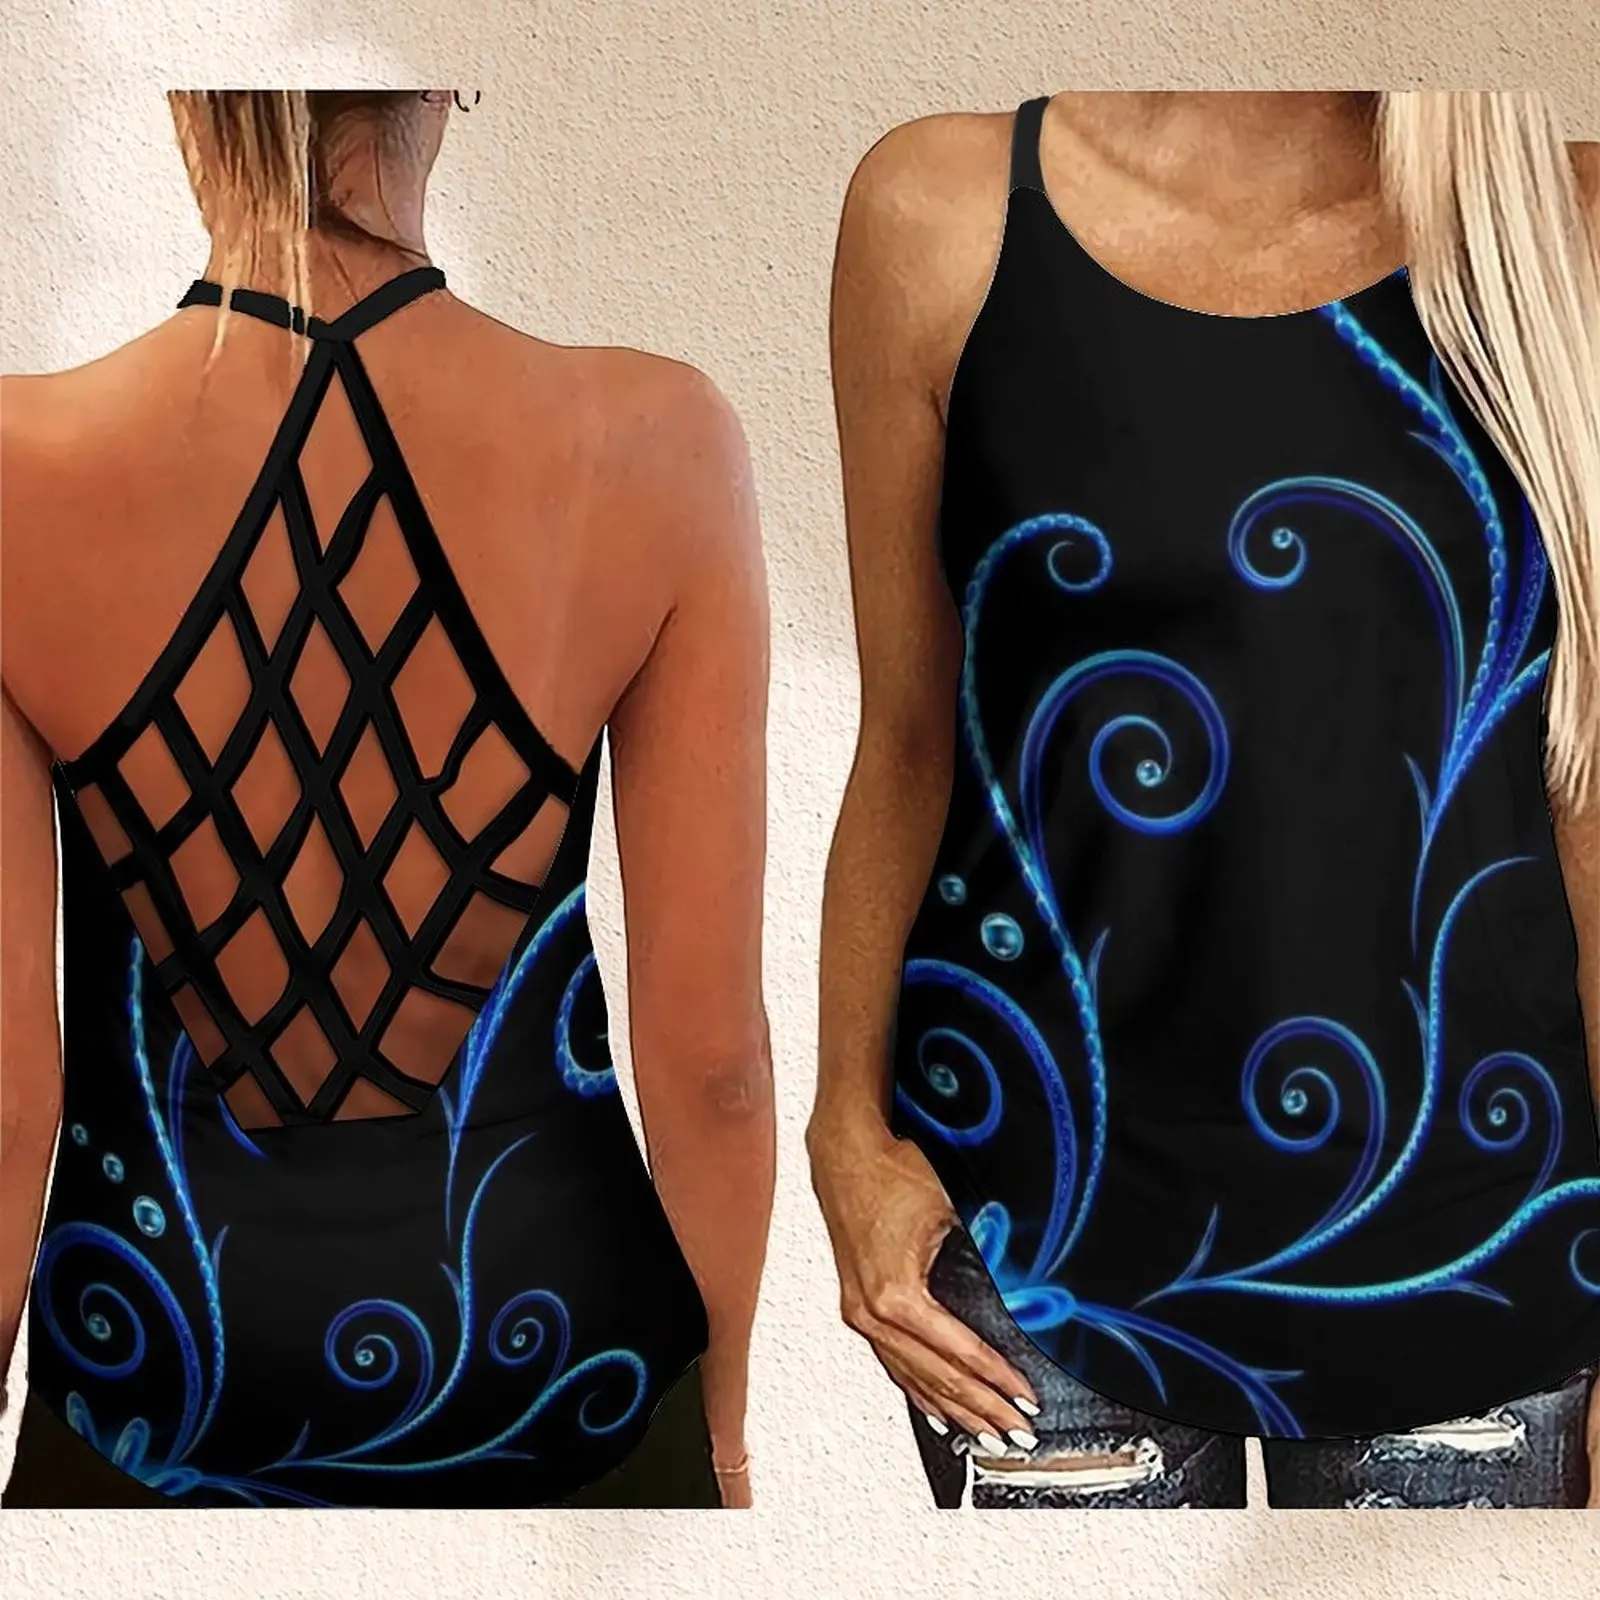 

Women's Fashion Backless Sleeveless Hollow Out Leaves Lines Shiny Print Cross Cross Tank Top Women's Vest XS-8XL